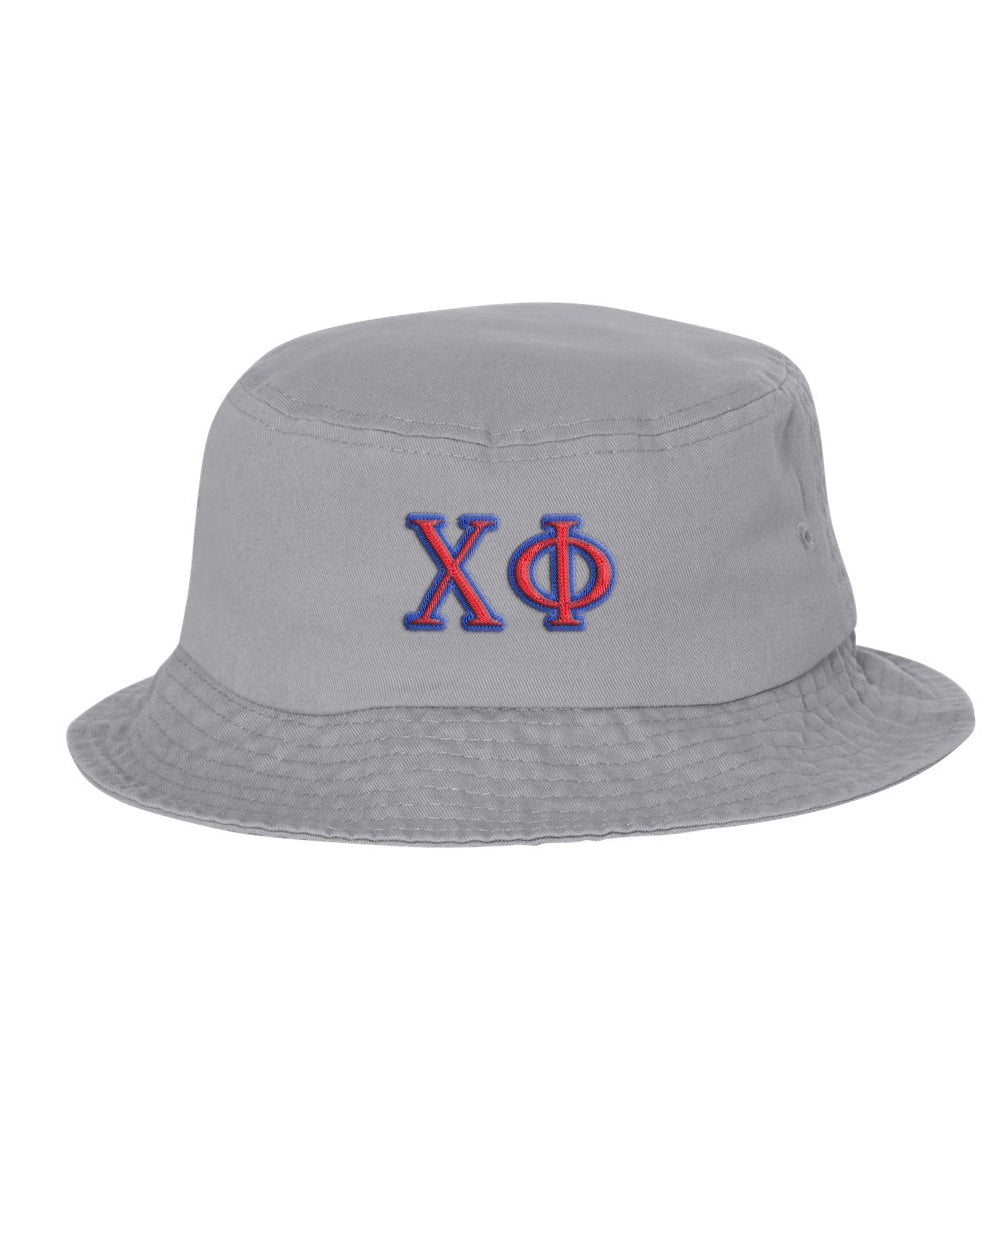 Chi Phi Embroidered Bucket Hat